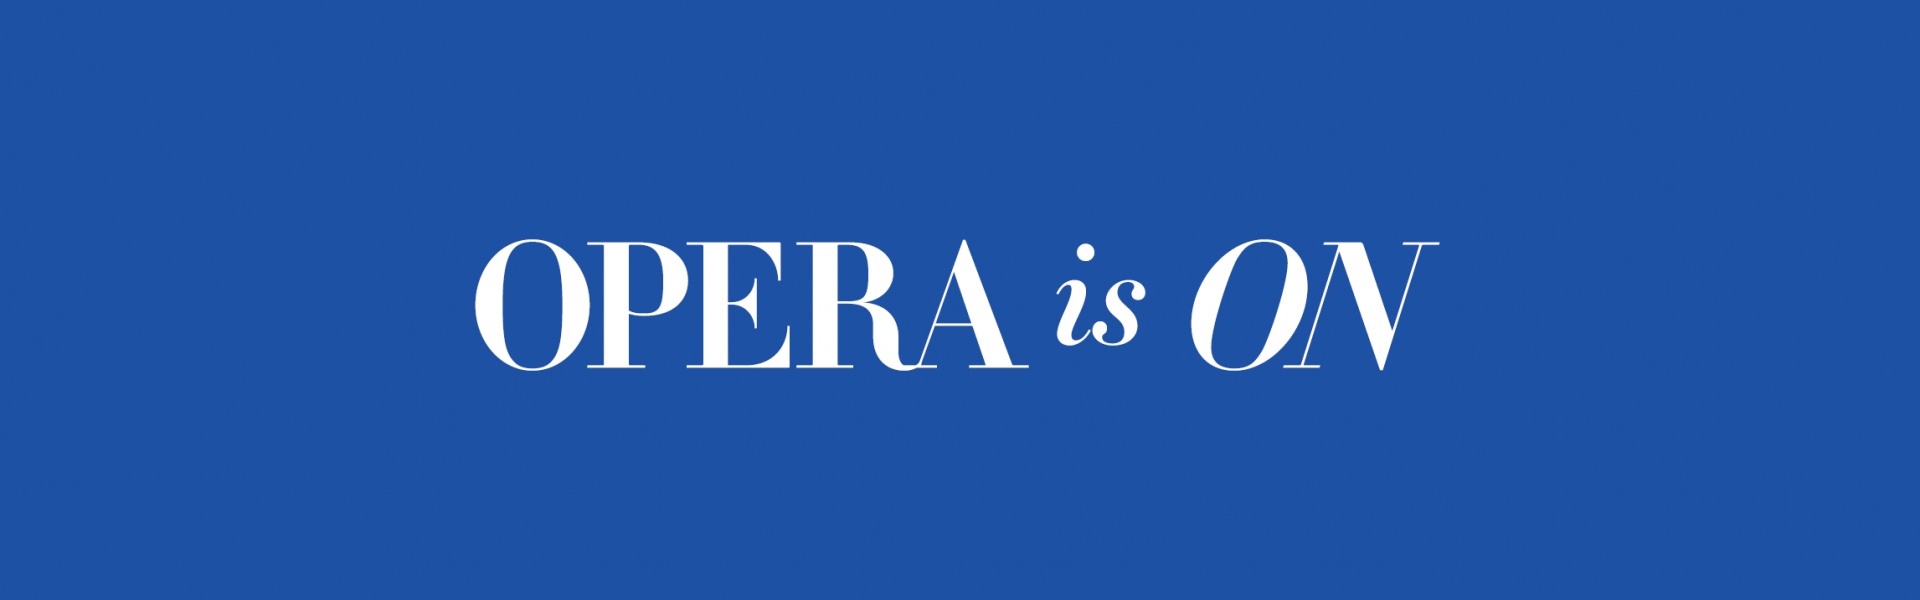 opera_is_on_blue.png